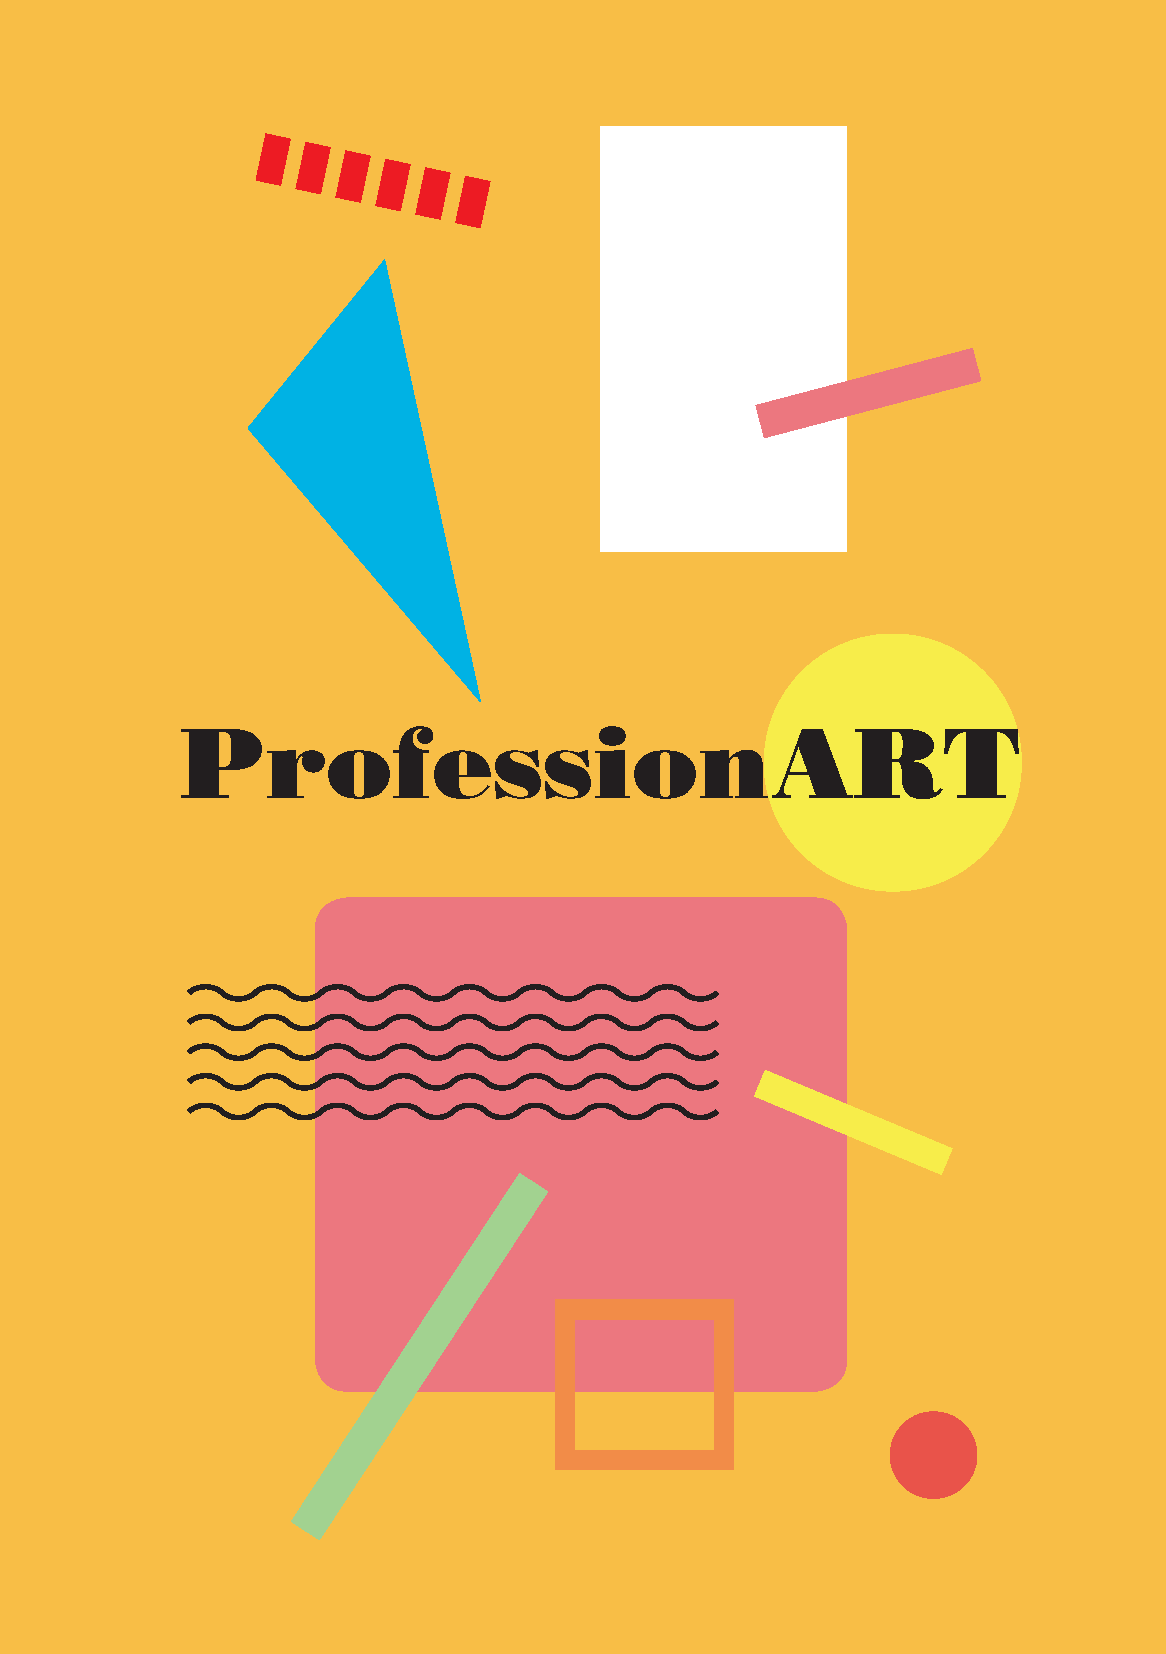 An abstract, colorful image. Squiggly lines, triangles, and boxes surround the word ProfessionART on a yellow background.